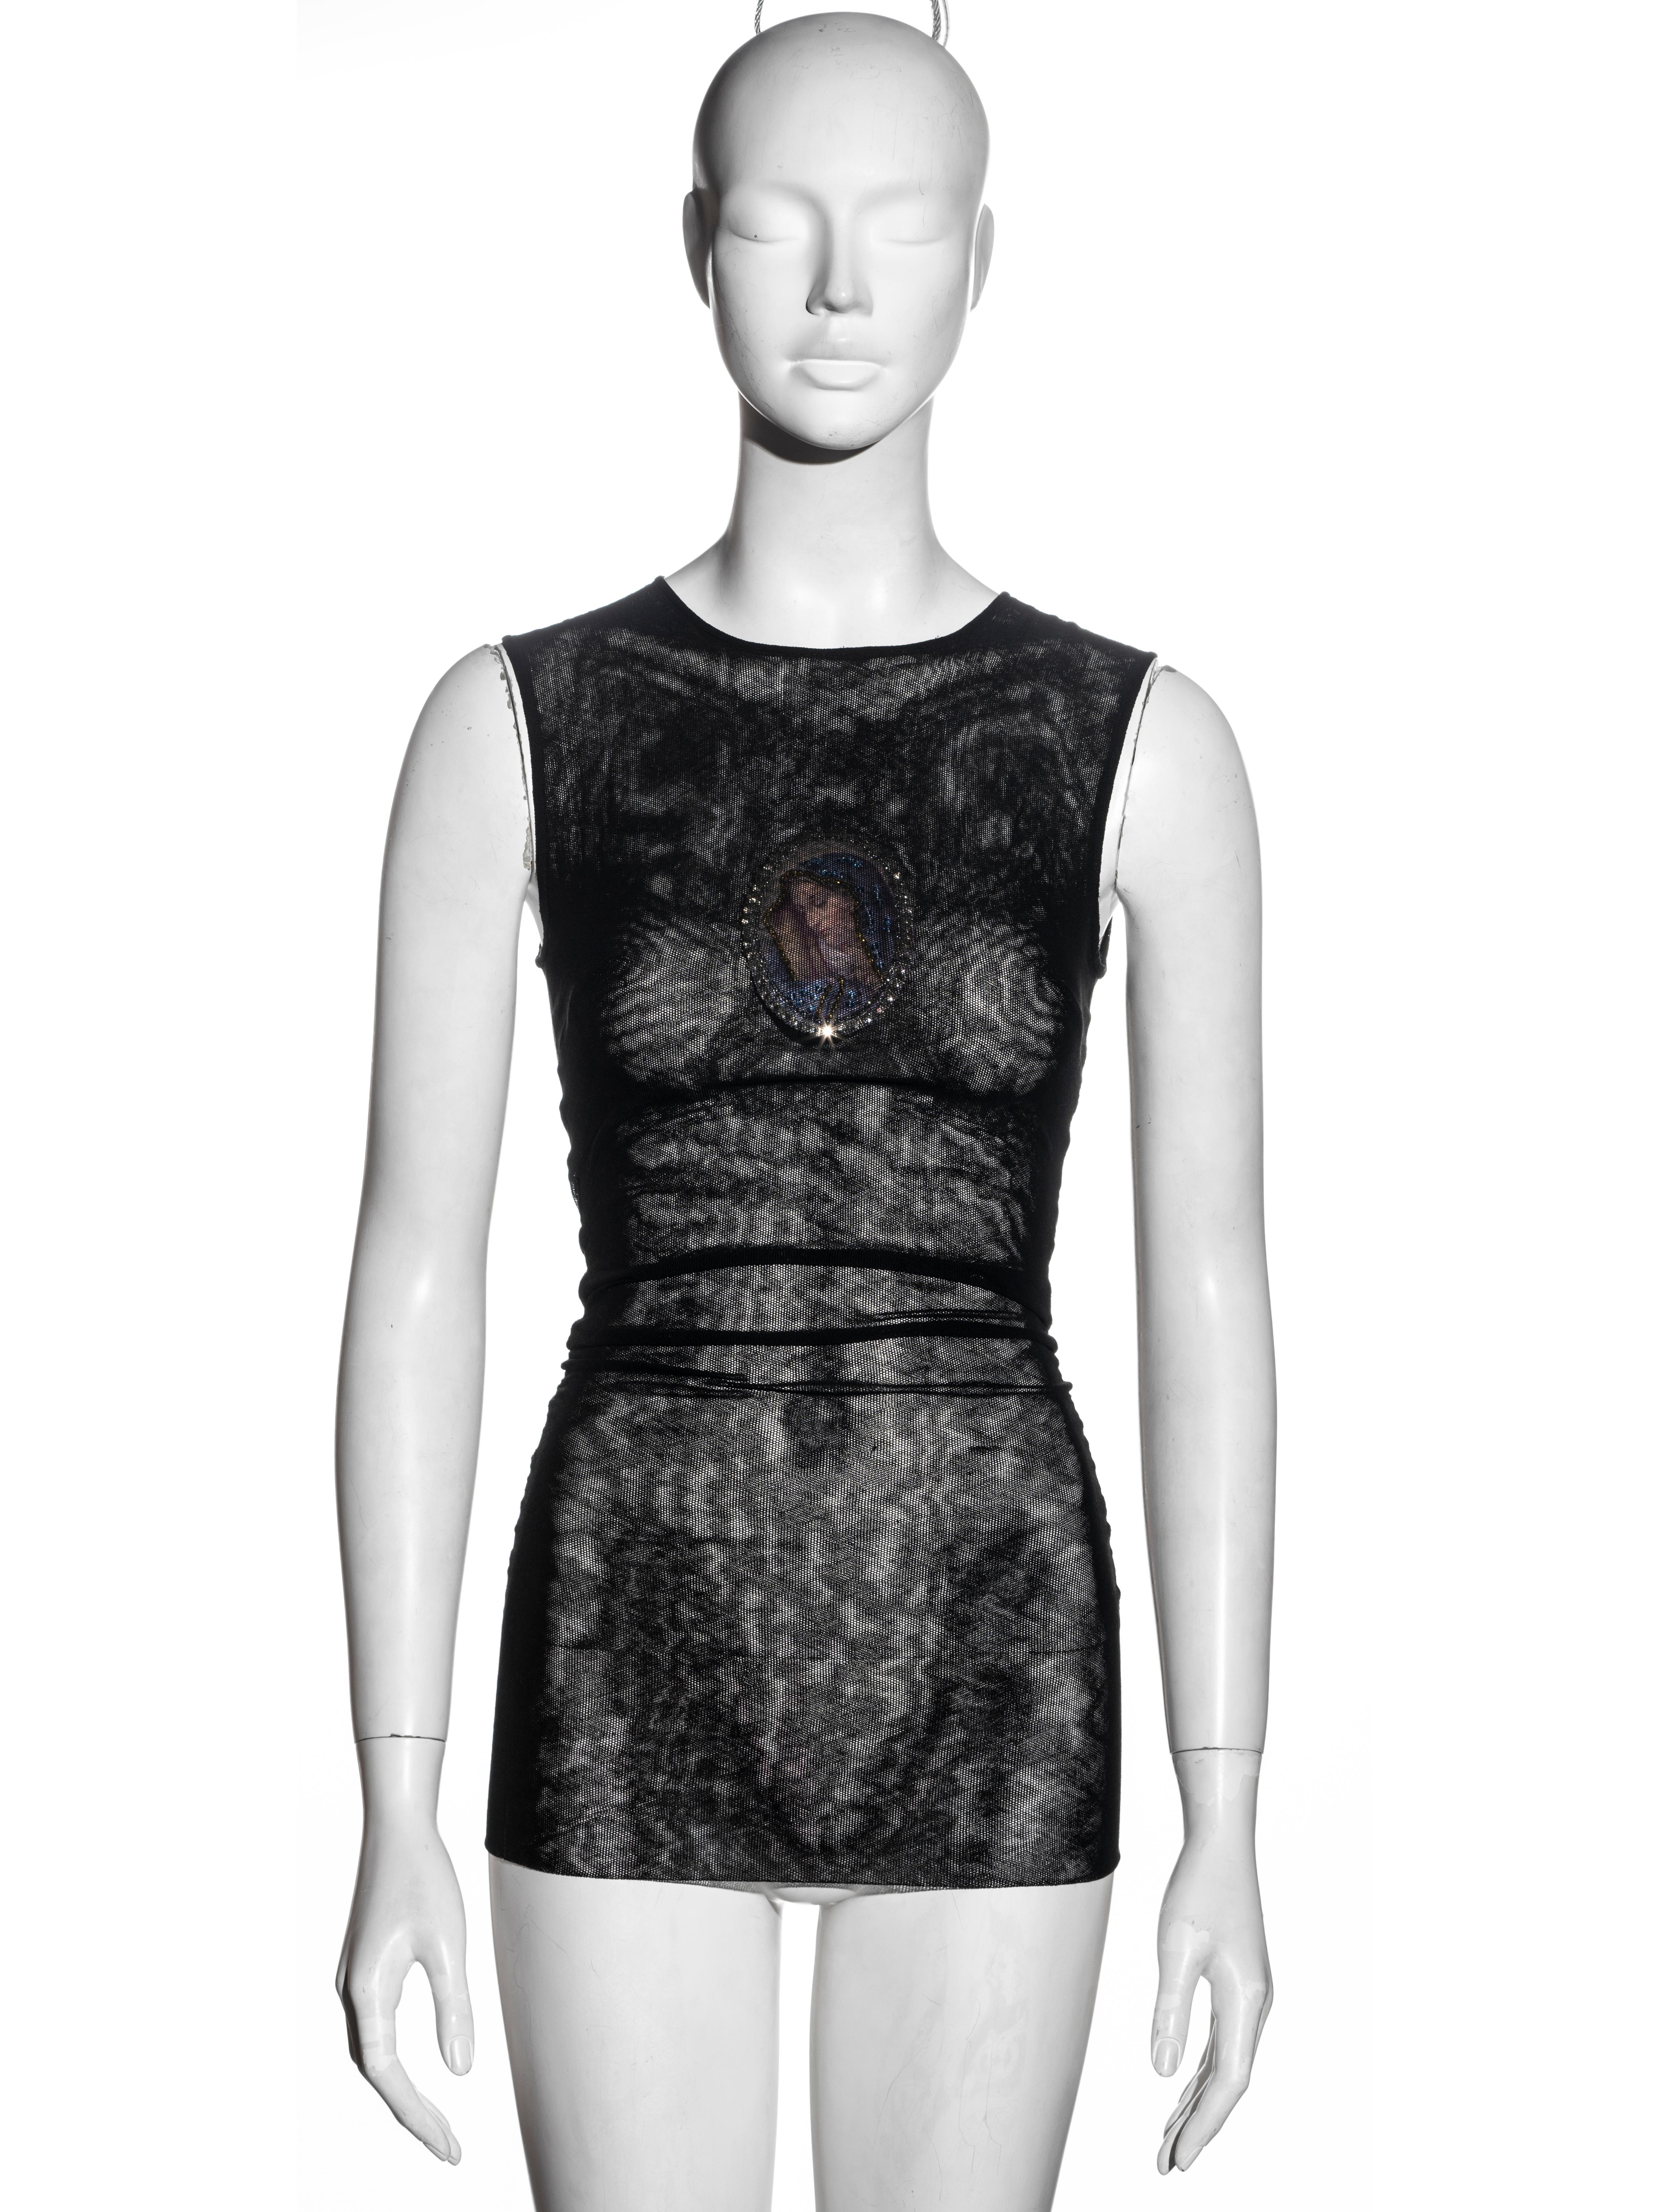 ▪ Dolce & Gabbana sleeveless evening top
▪ Black cotton mesh 
▪ Ruched seams
▪ Virgin Mary with crystals 
▪ Double layered
▪ Skin tight
▪ Size XS / S
▪ Spring-Summer 1998
▪ 66% Cotton, 34% Lycra
▪ Made in Italy